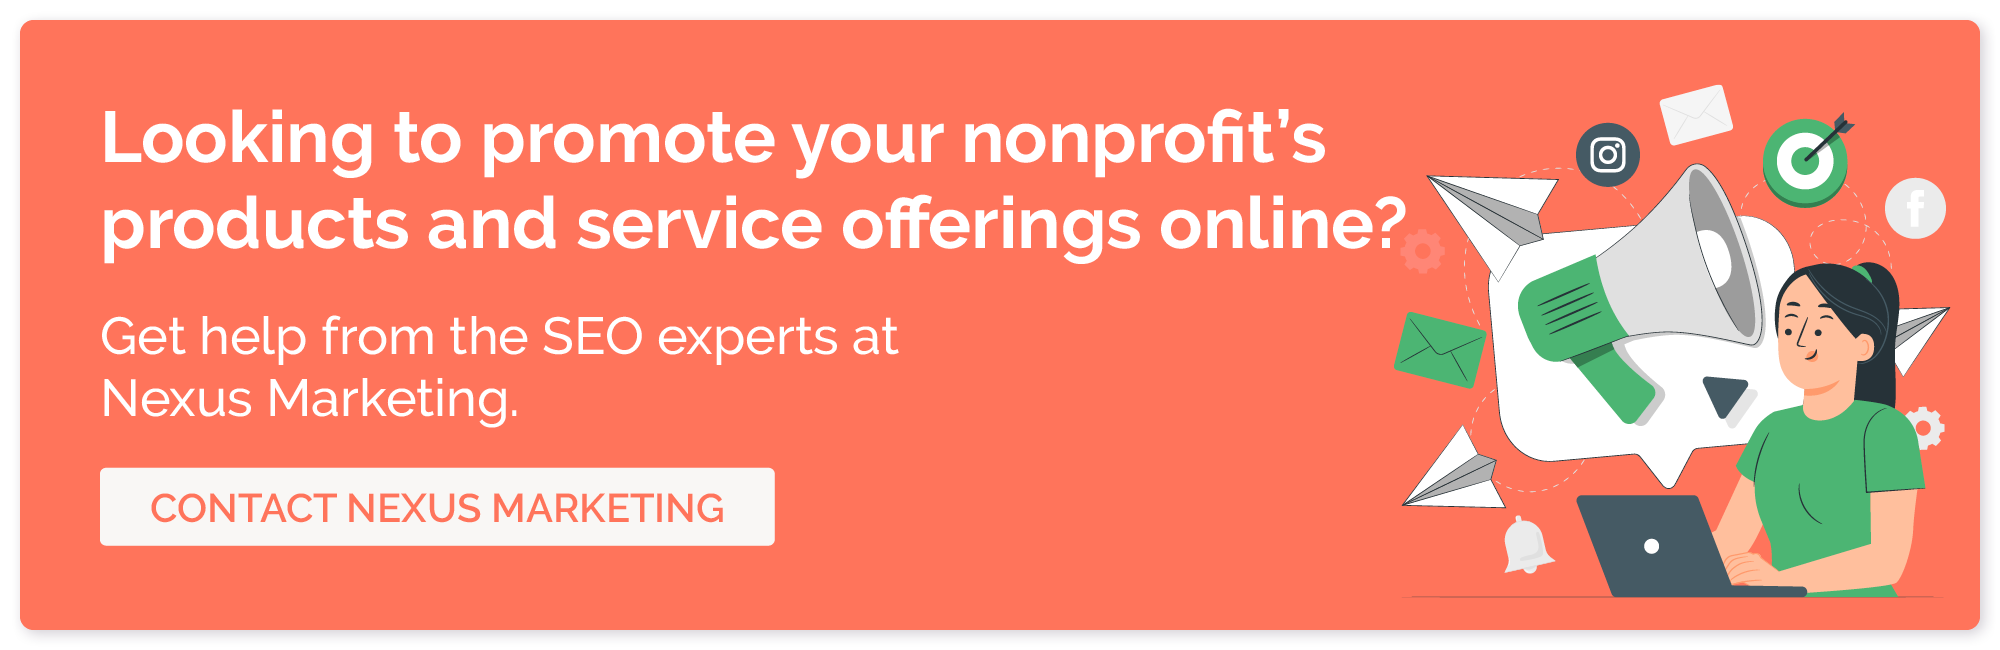 Looking to promote your nonprofit's products and service offerings online? Get help from the SEO experts at Nexus Marketing. Contact Nexus Marketing.